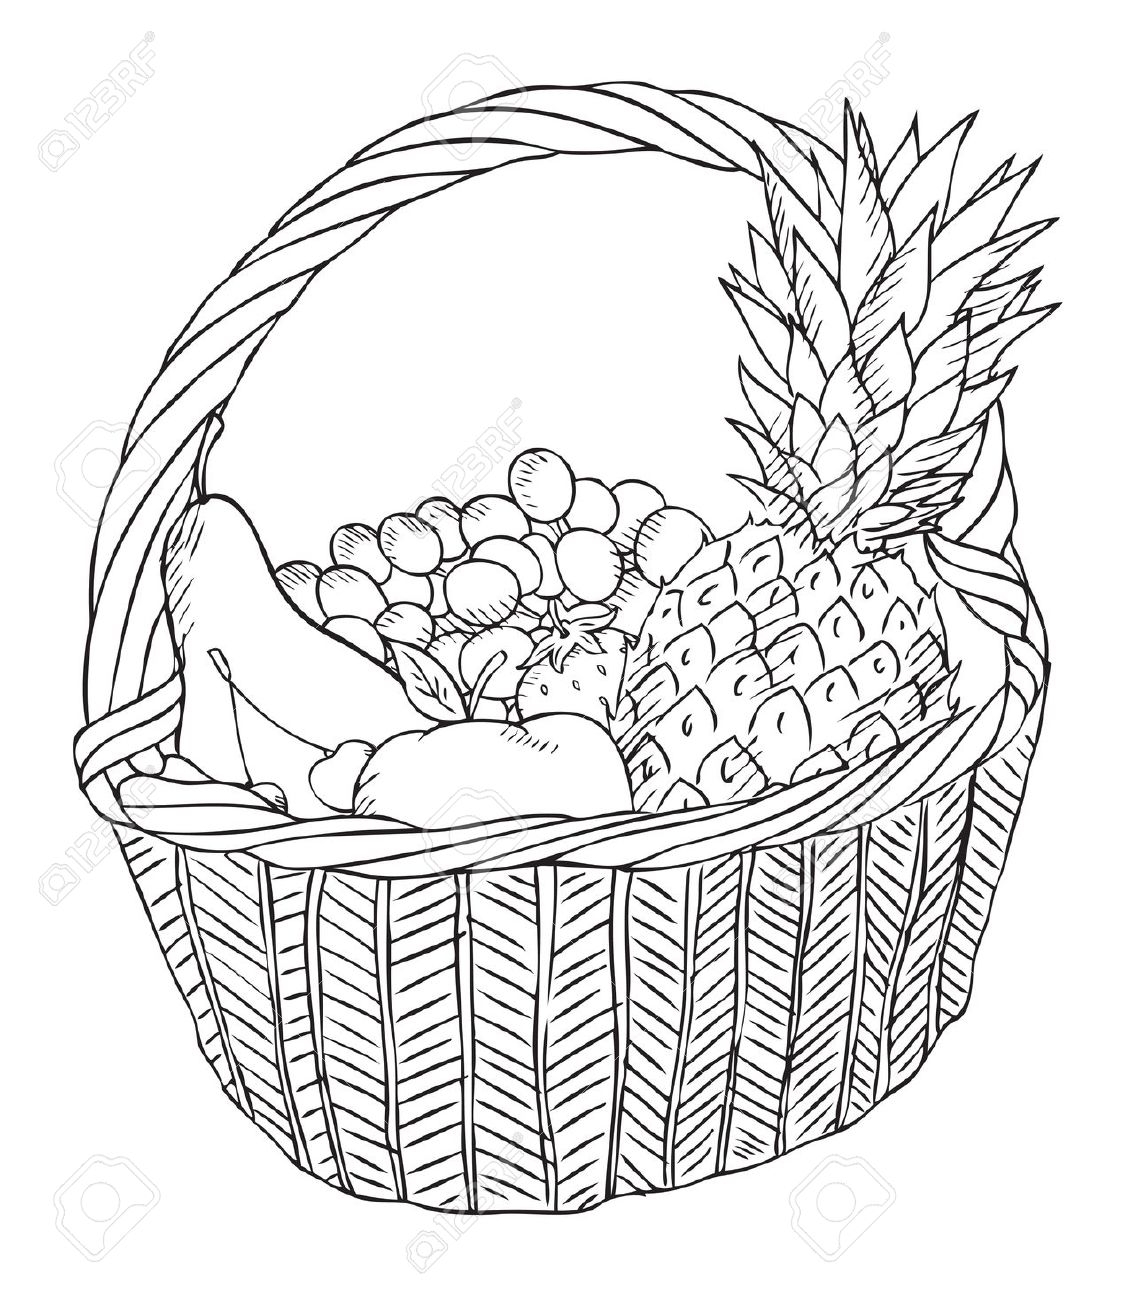 Fruit baskets at getdrawings. Basket clipart line drawing